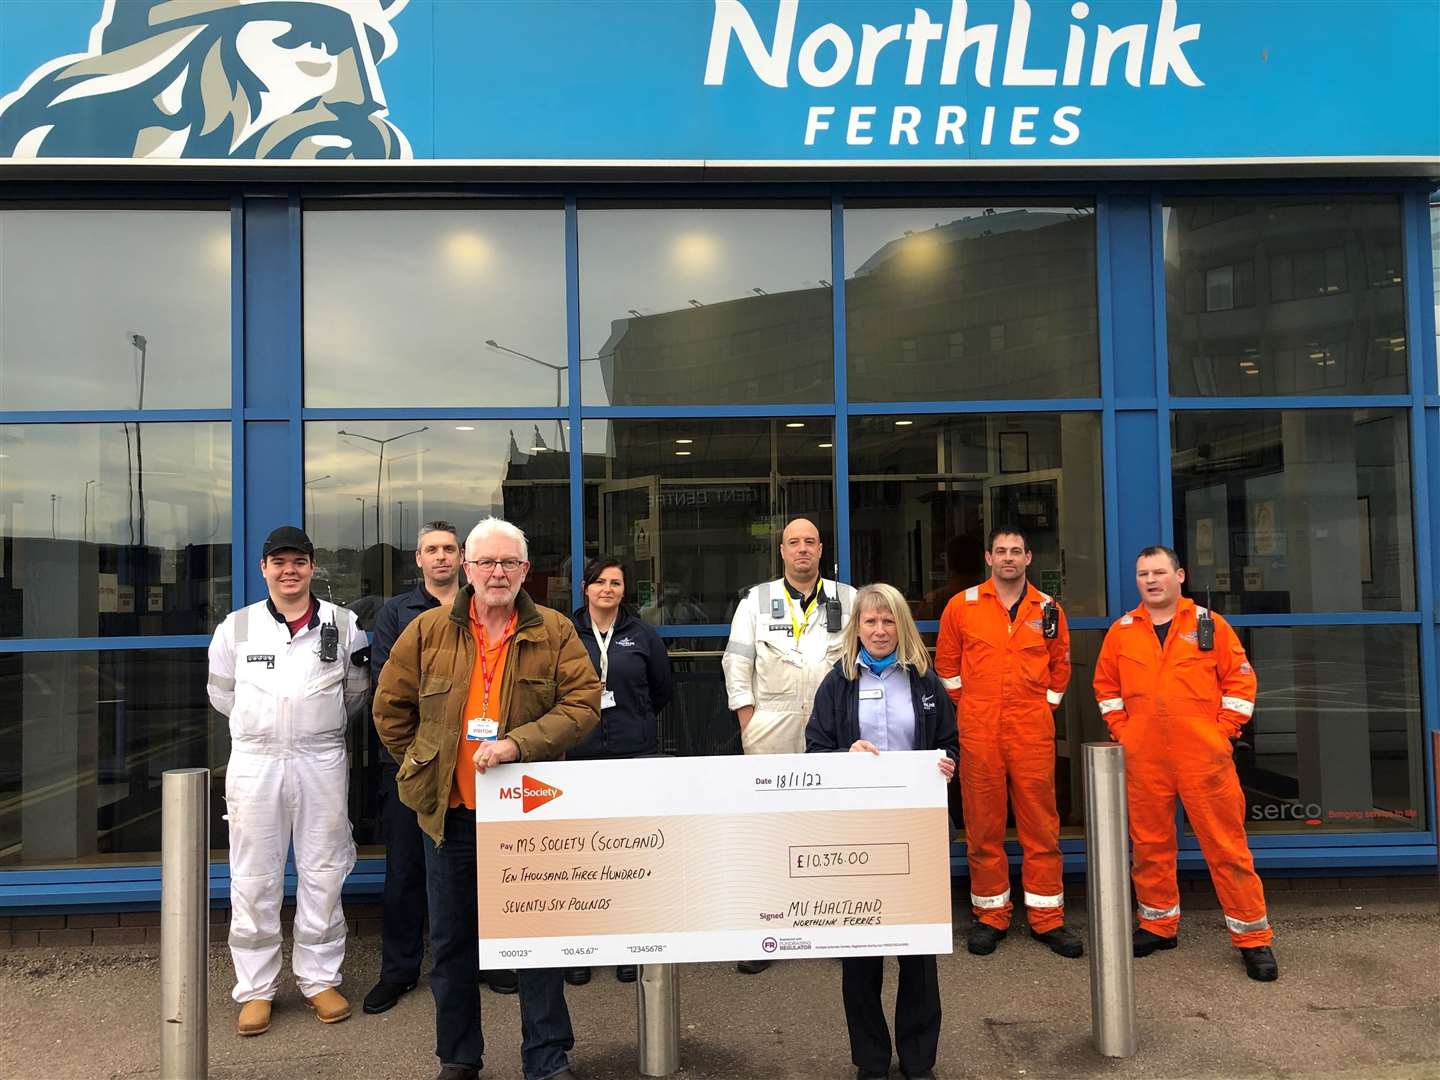 Kathryn Fullerton, shop manager and one of the main fundraisers at NorthLink Ferries, hands over a cheque to Mark Colley-Davies, community fundraiser at MS Society Scotland, accompanied by colleagues from NorthLink Ferries.